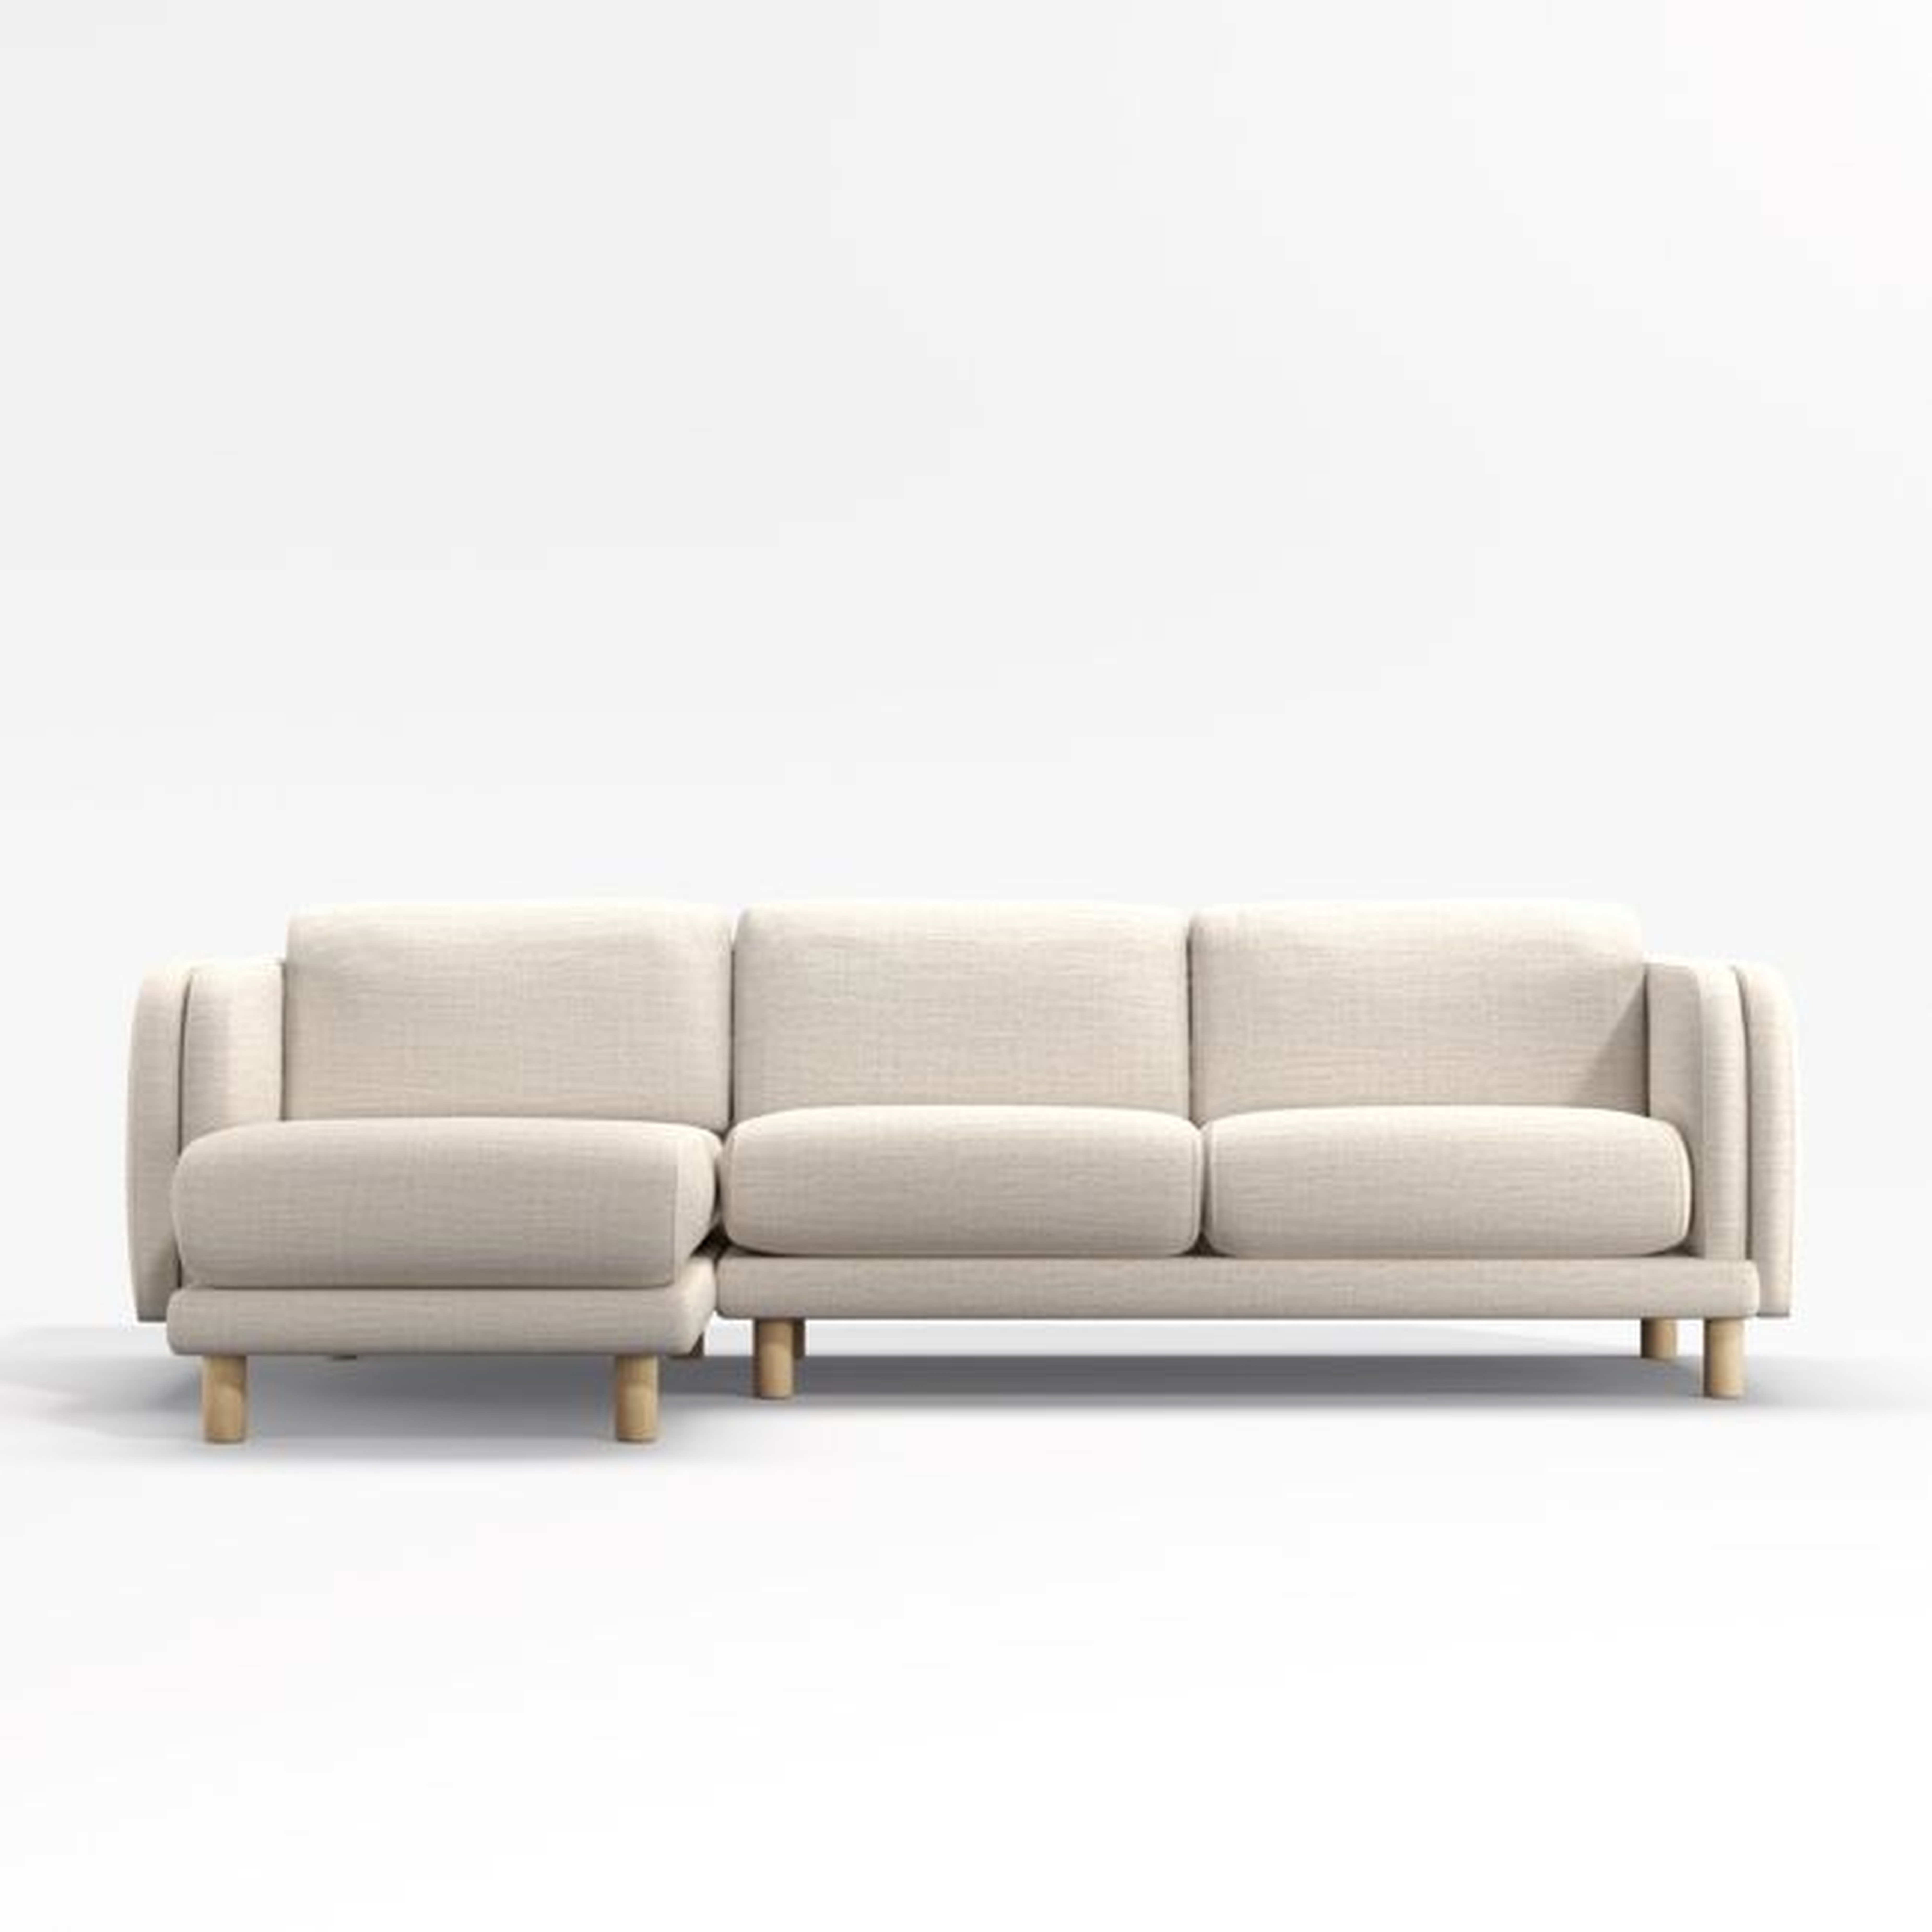 Pershing 2-Piece Chaise Sectional - Crate and Barrel